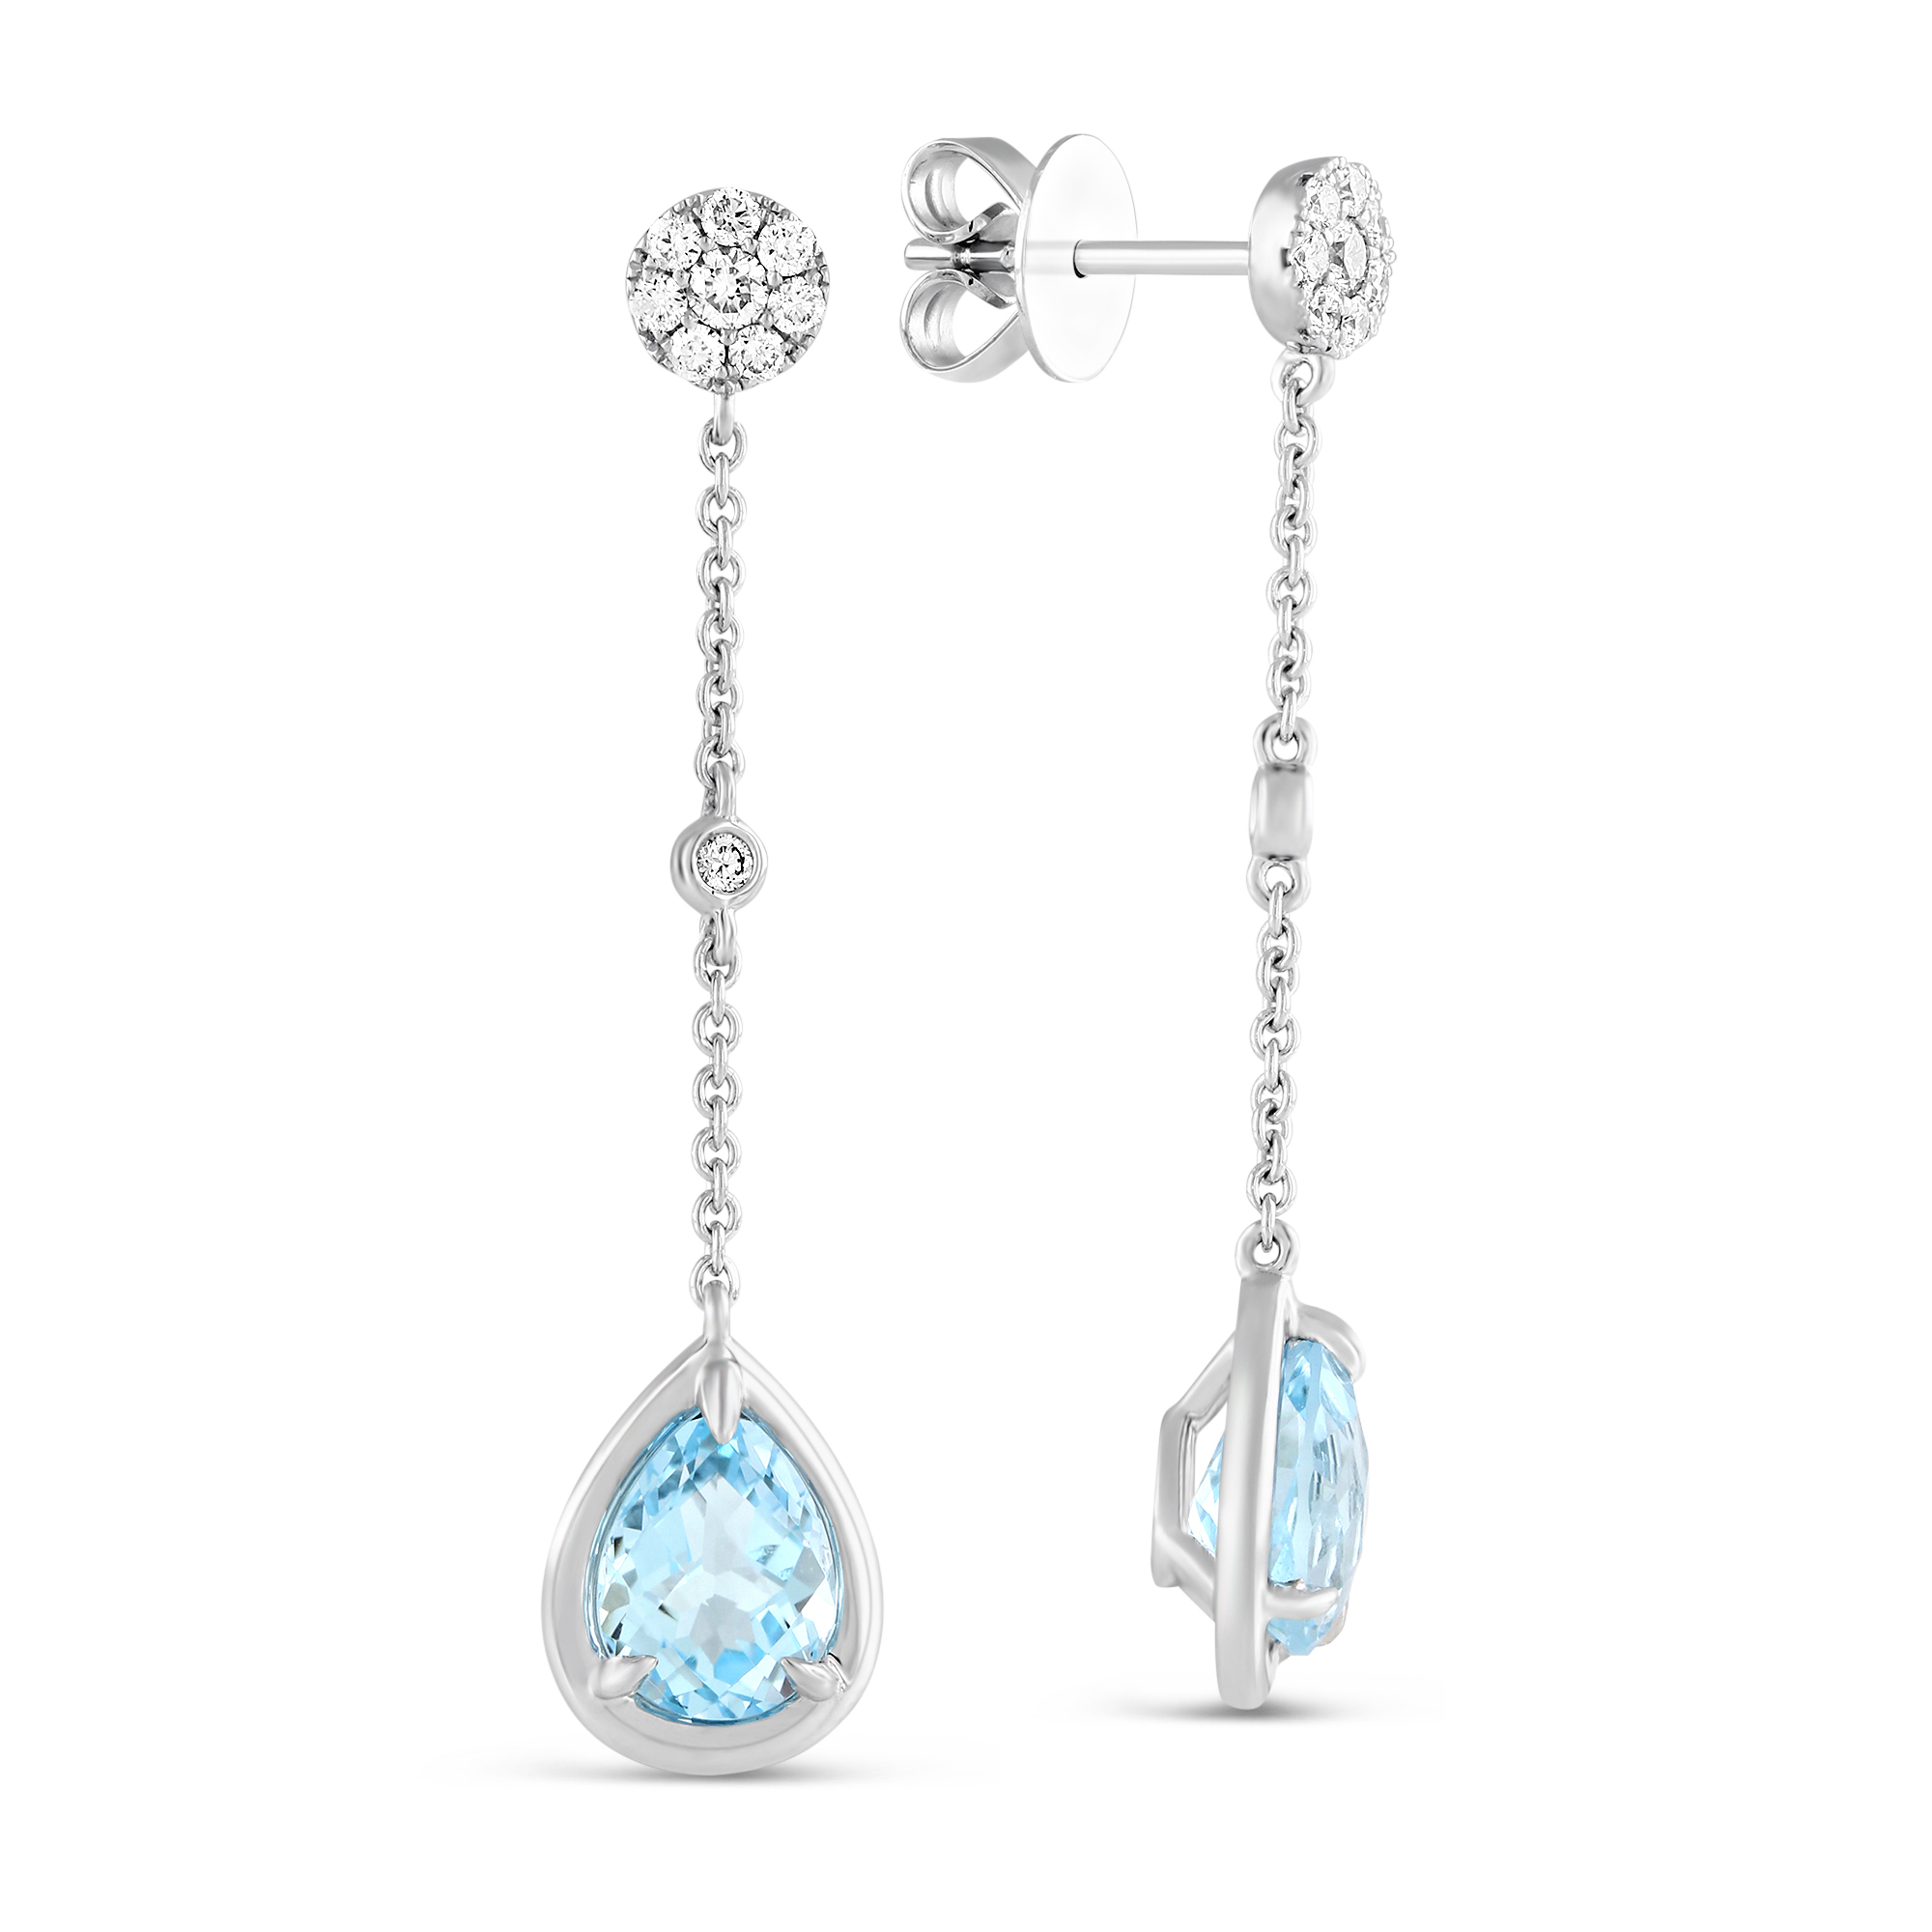 14K White Gold Earrings with Dangling Pear Shape and Round Blue Topaz Gemstones